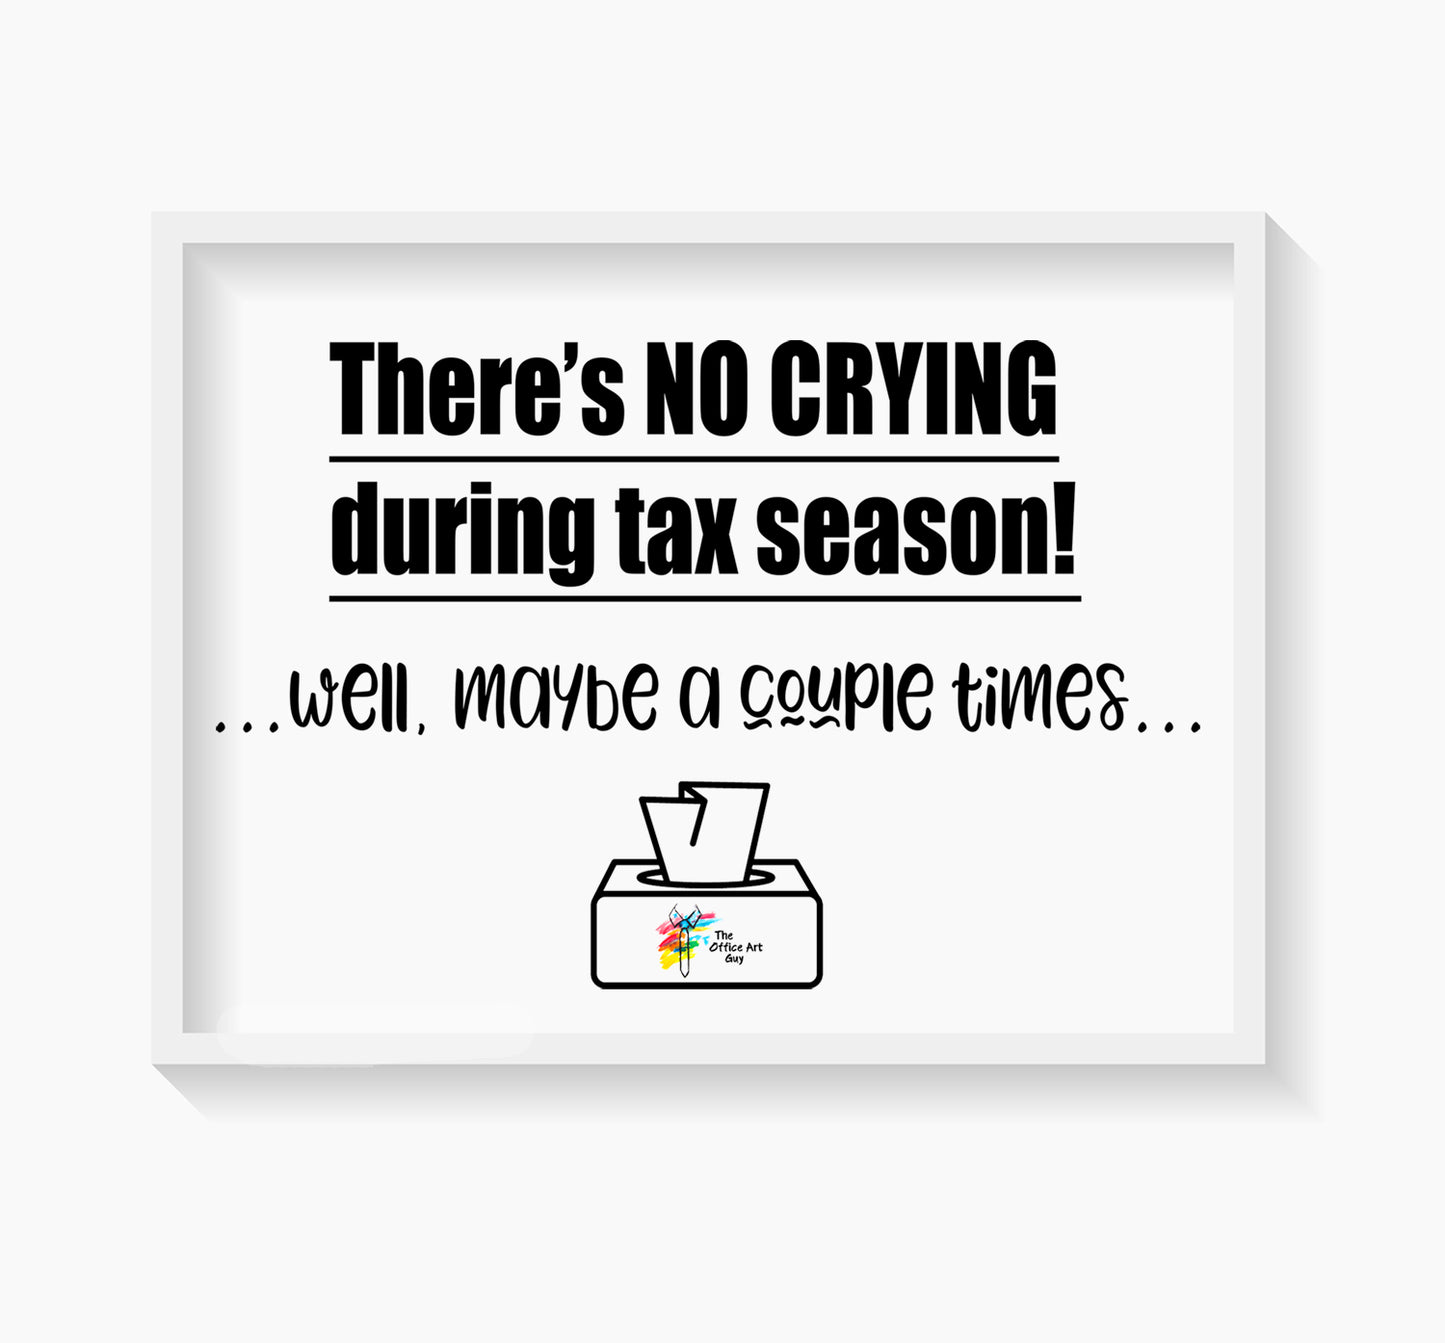 There's No Crying During Tax Season art print by The Office Art Guy